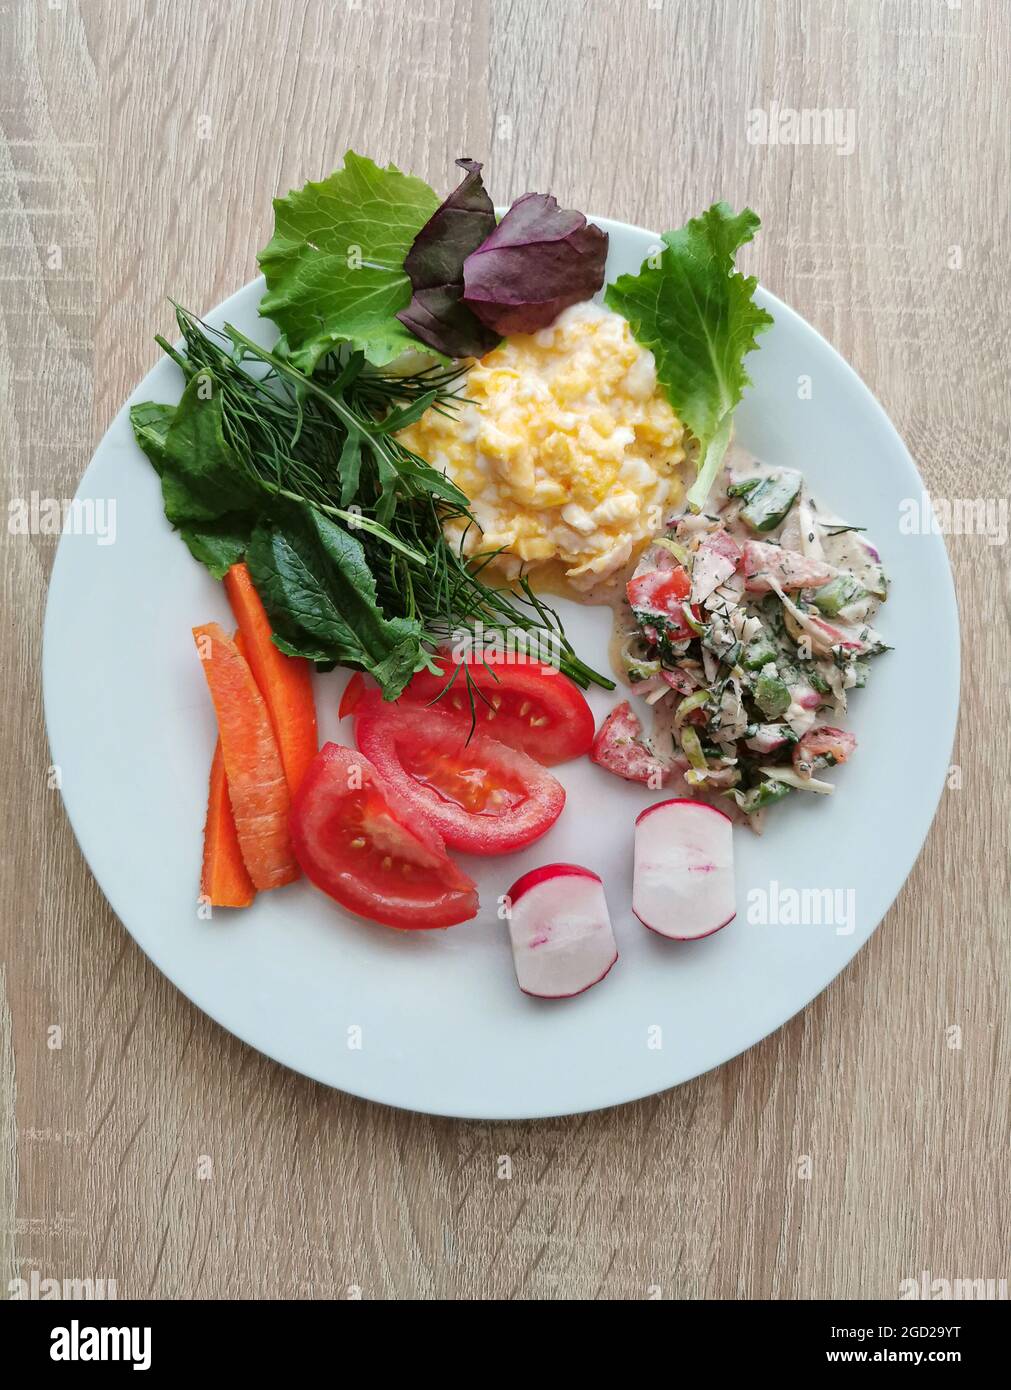 A healthy and balanced breakfast. Scrambled eggs, tomato, carrot, radish, salad, green leaves of fresh vegetables Stock Photo